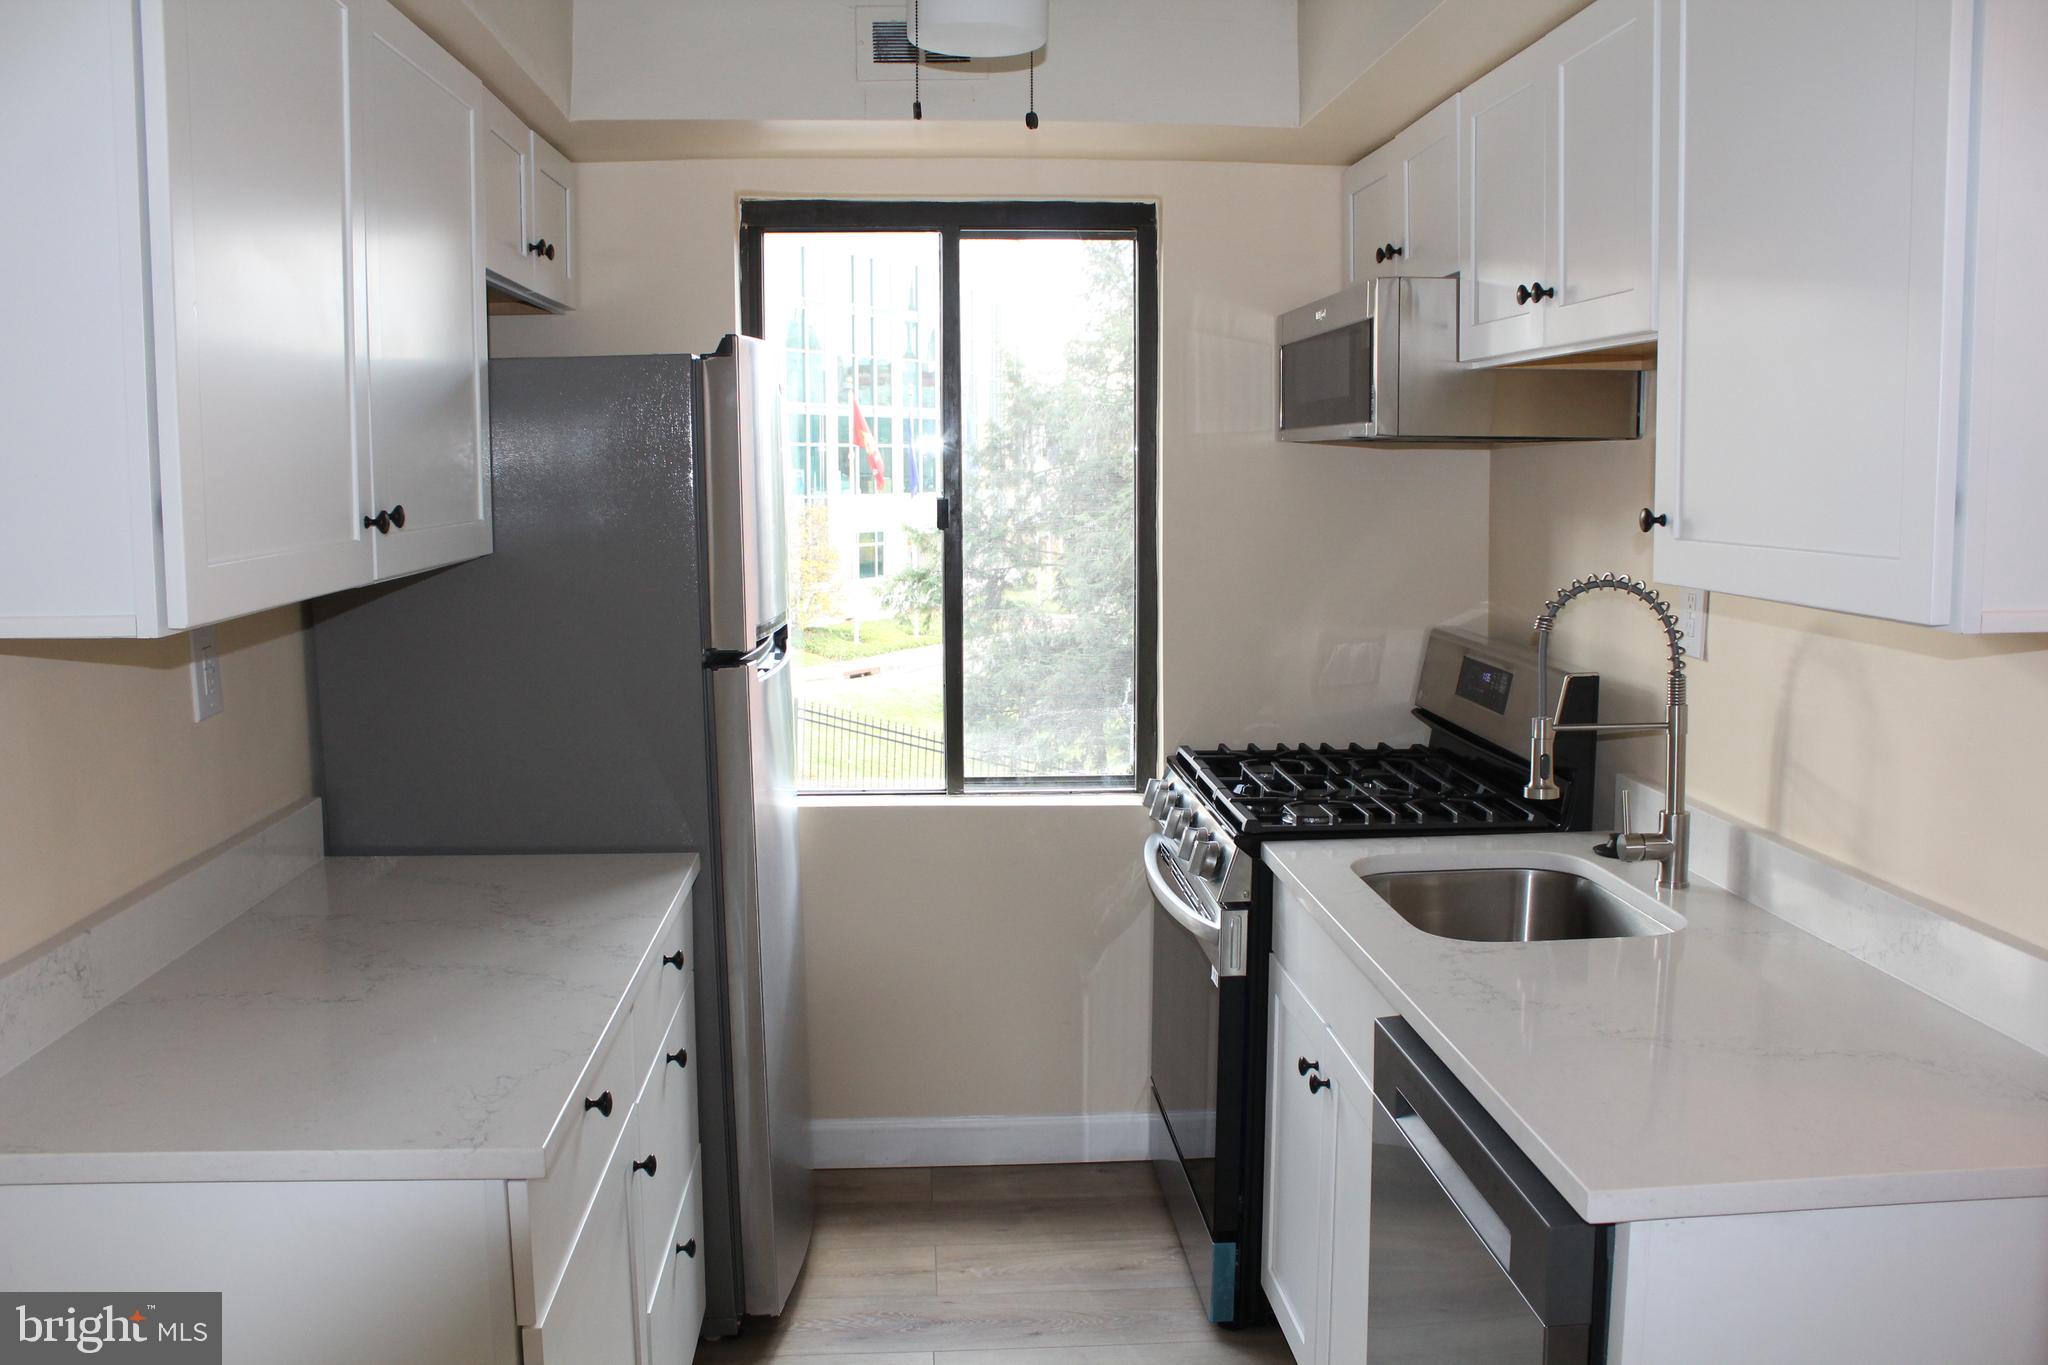 a kitchen that has a sink a stove and a refrigerator